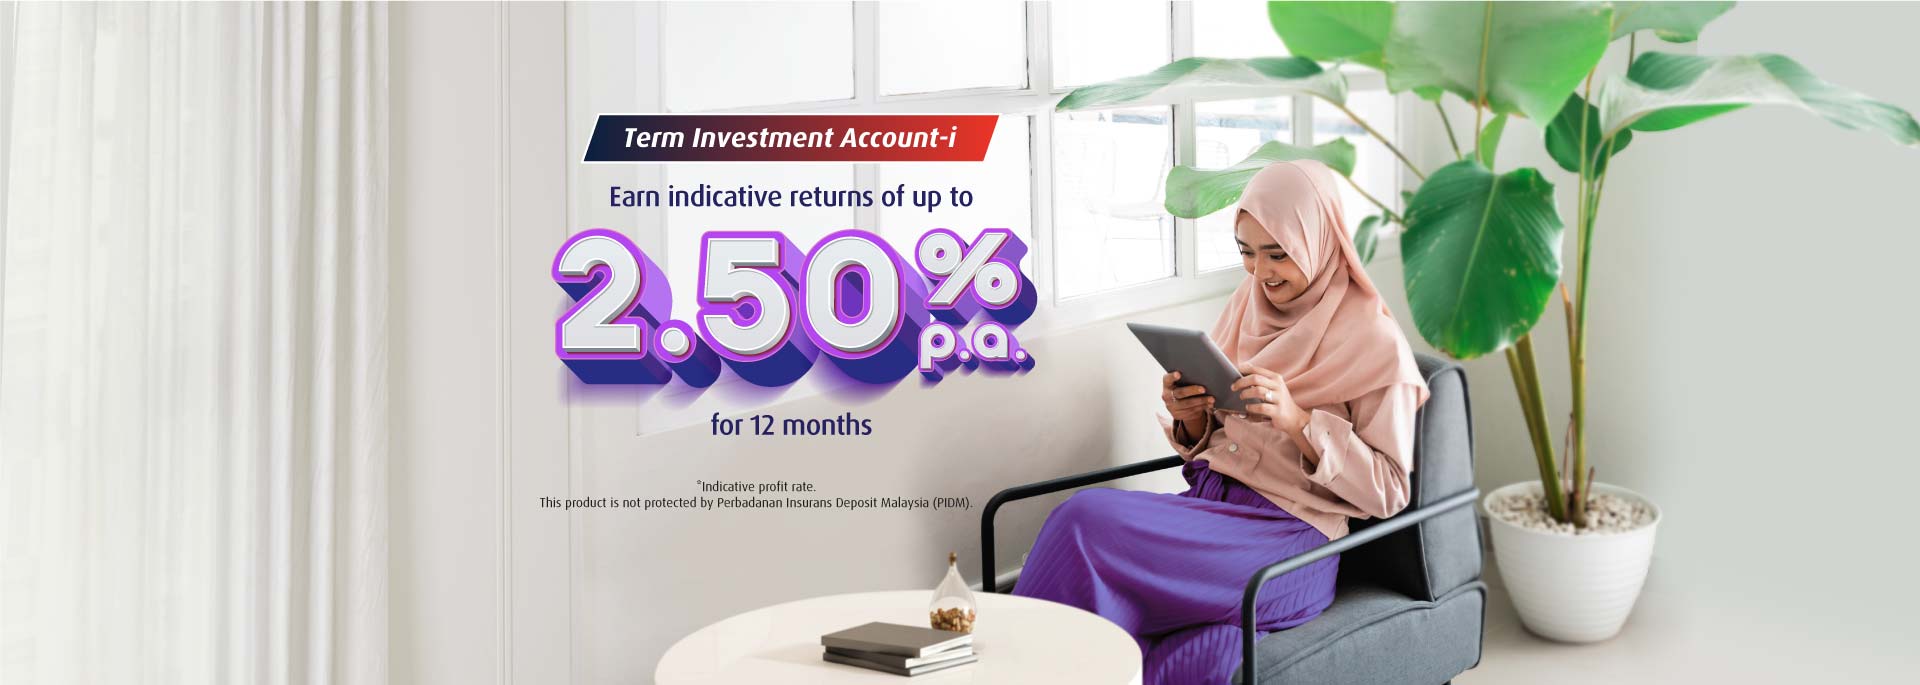 Term Investment Account-i - Earn indicative returns of up to 2.50% p.a. for 12 months